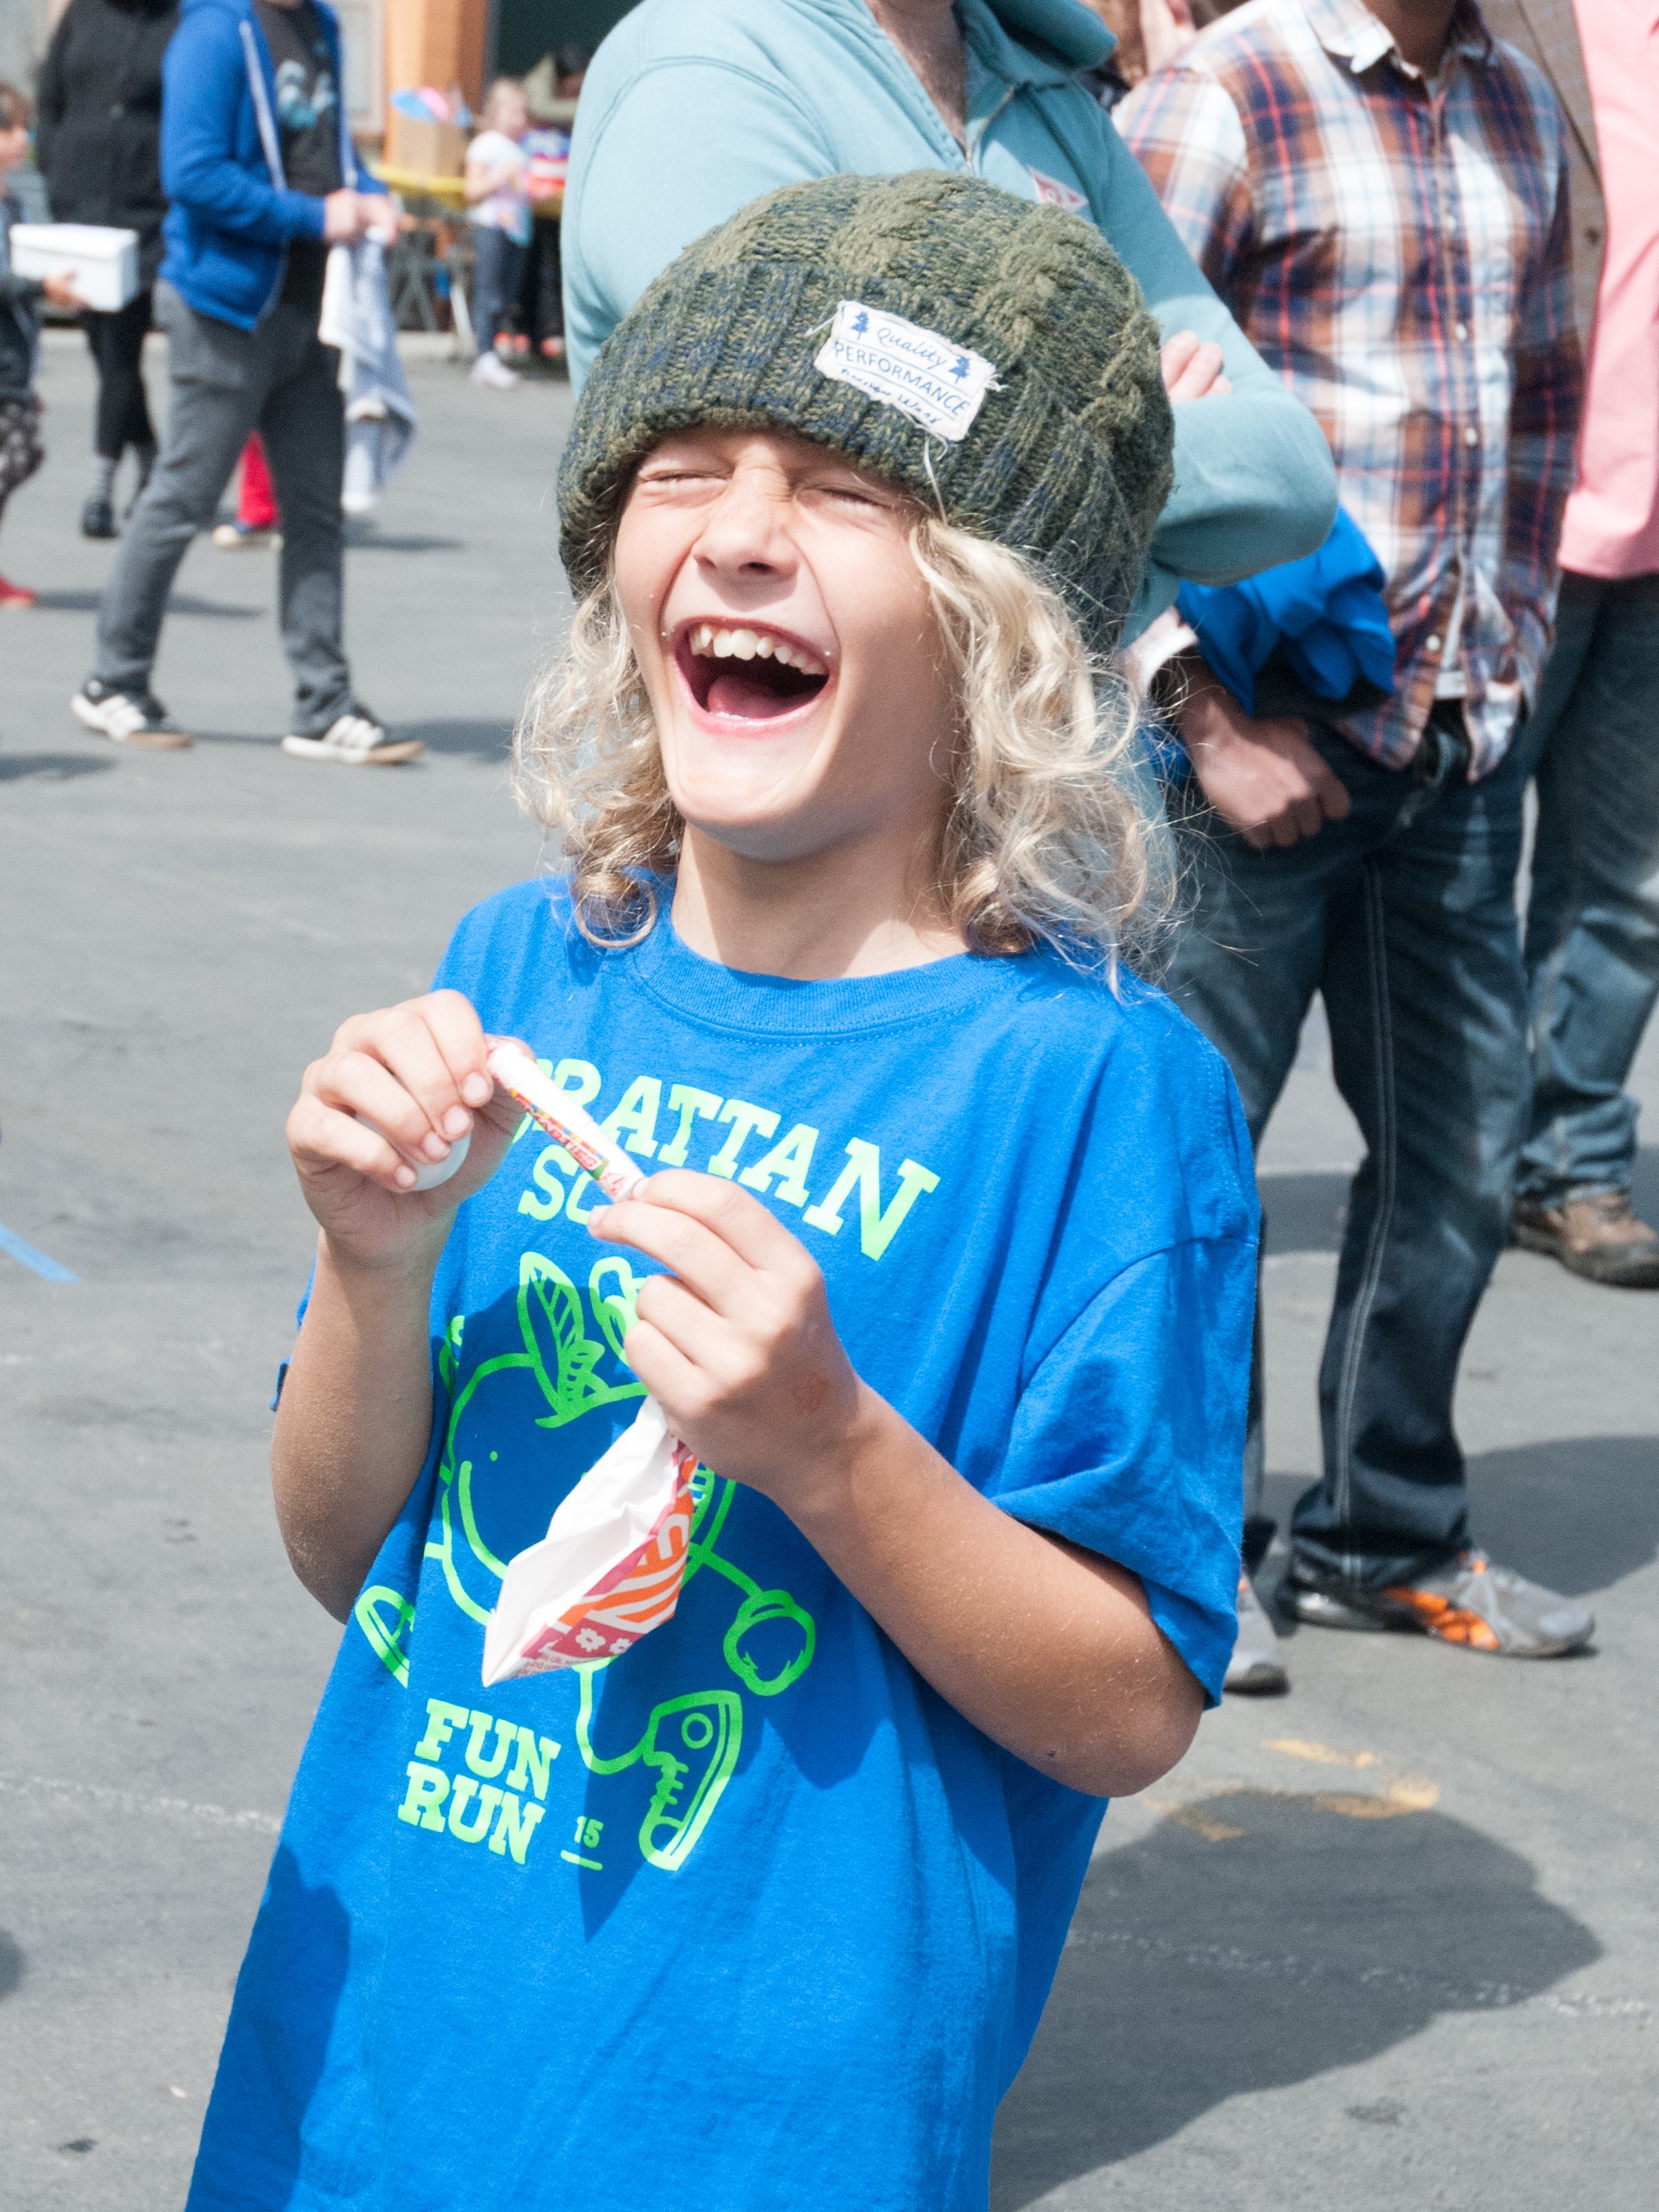 Child laughing wildly at an outdoor school festival